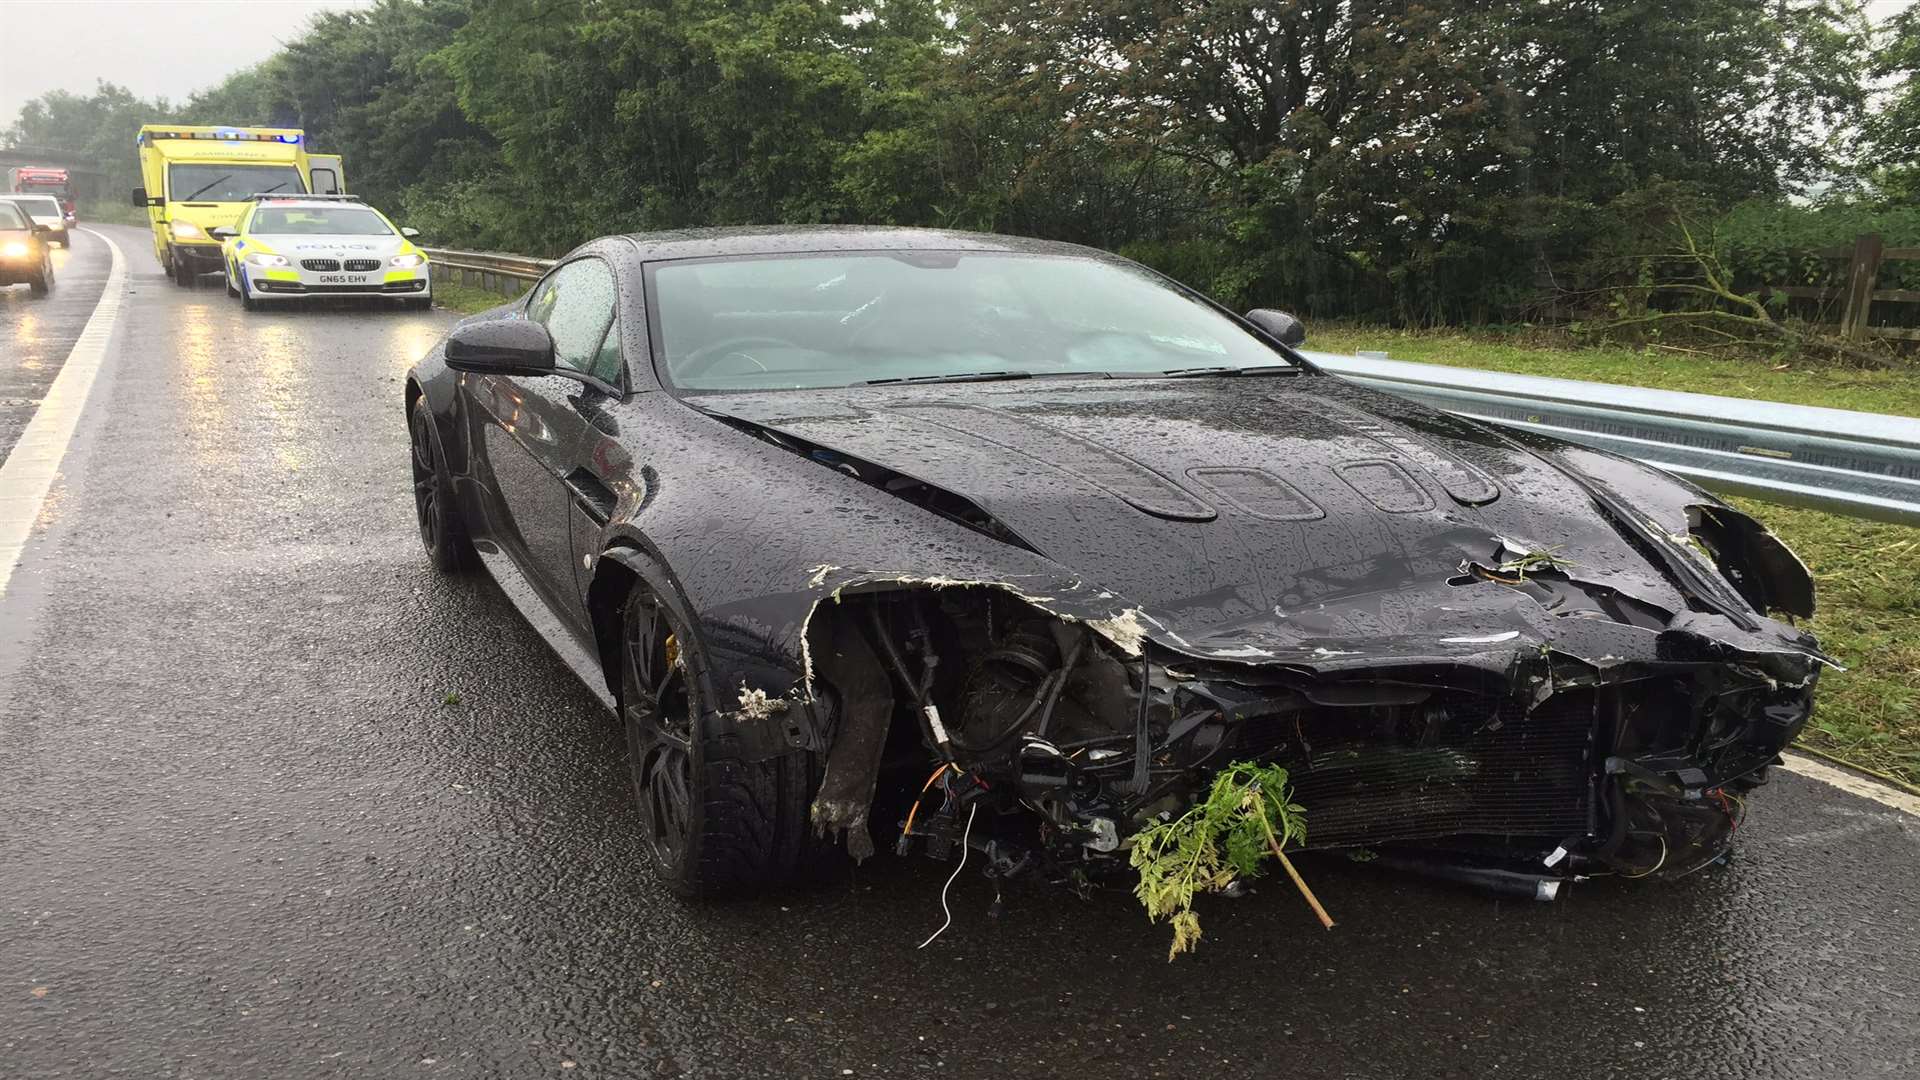 The car crashed on the M20 near Maidstone. Pic: Kent Police